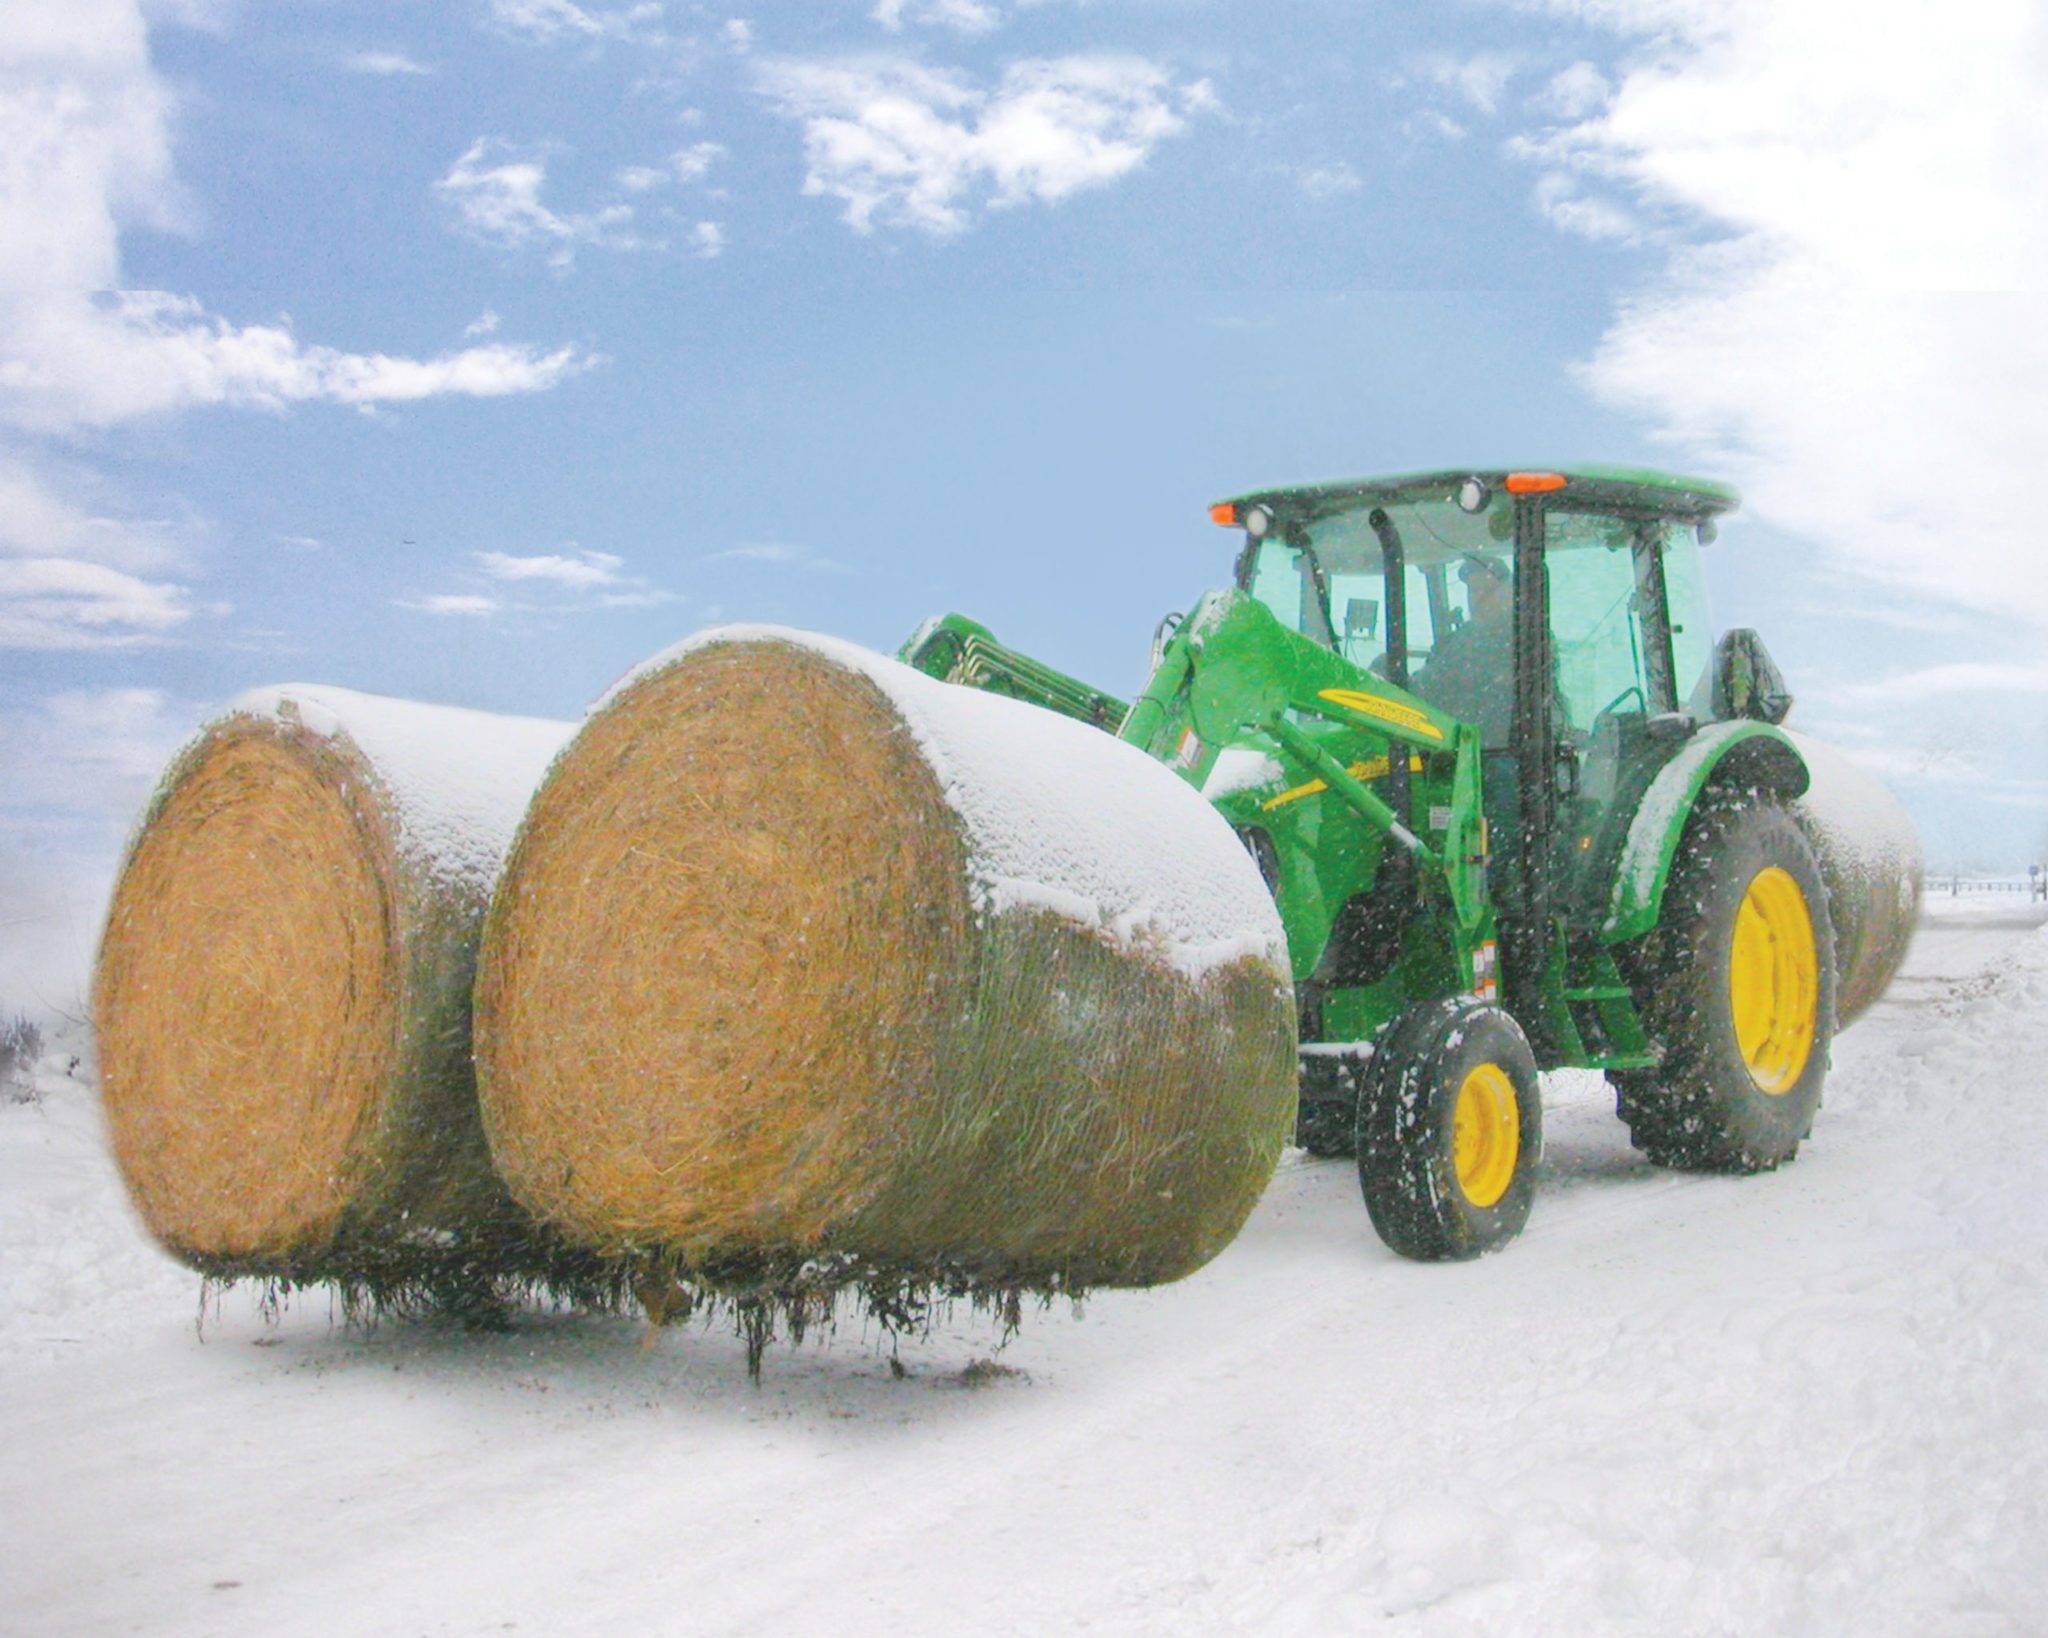 John Deere Two Bale Mover lifting two bales